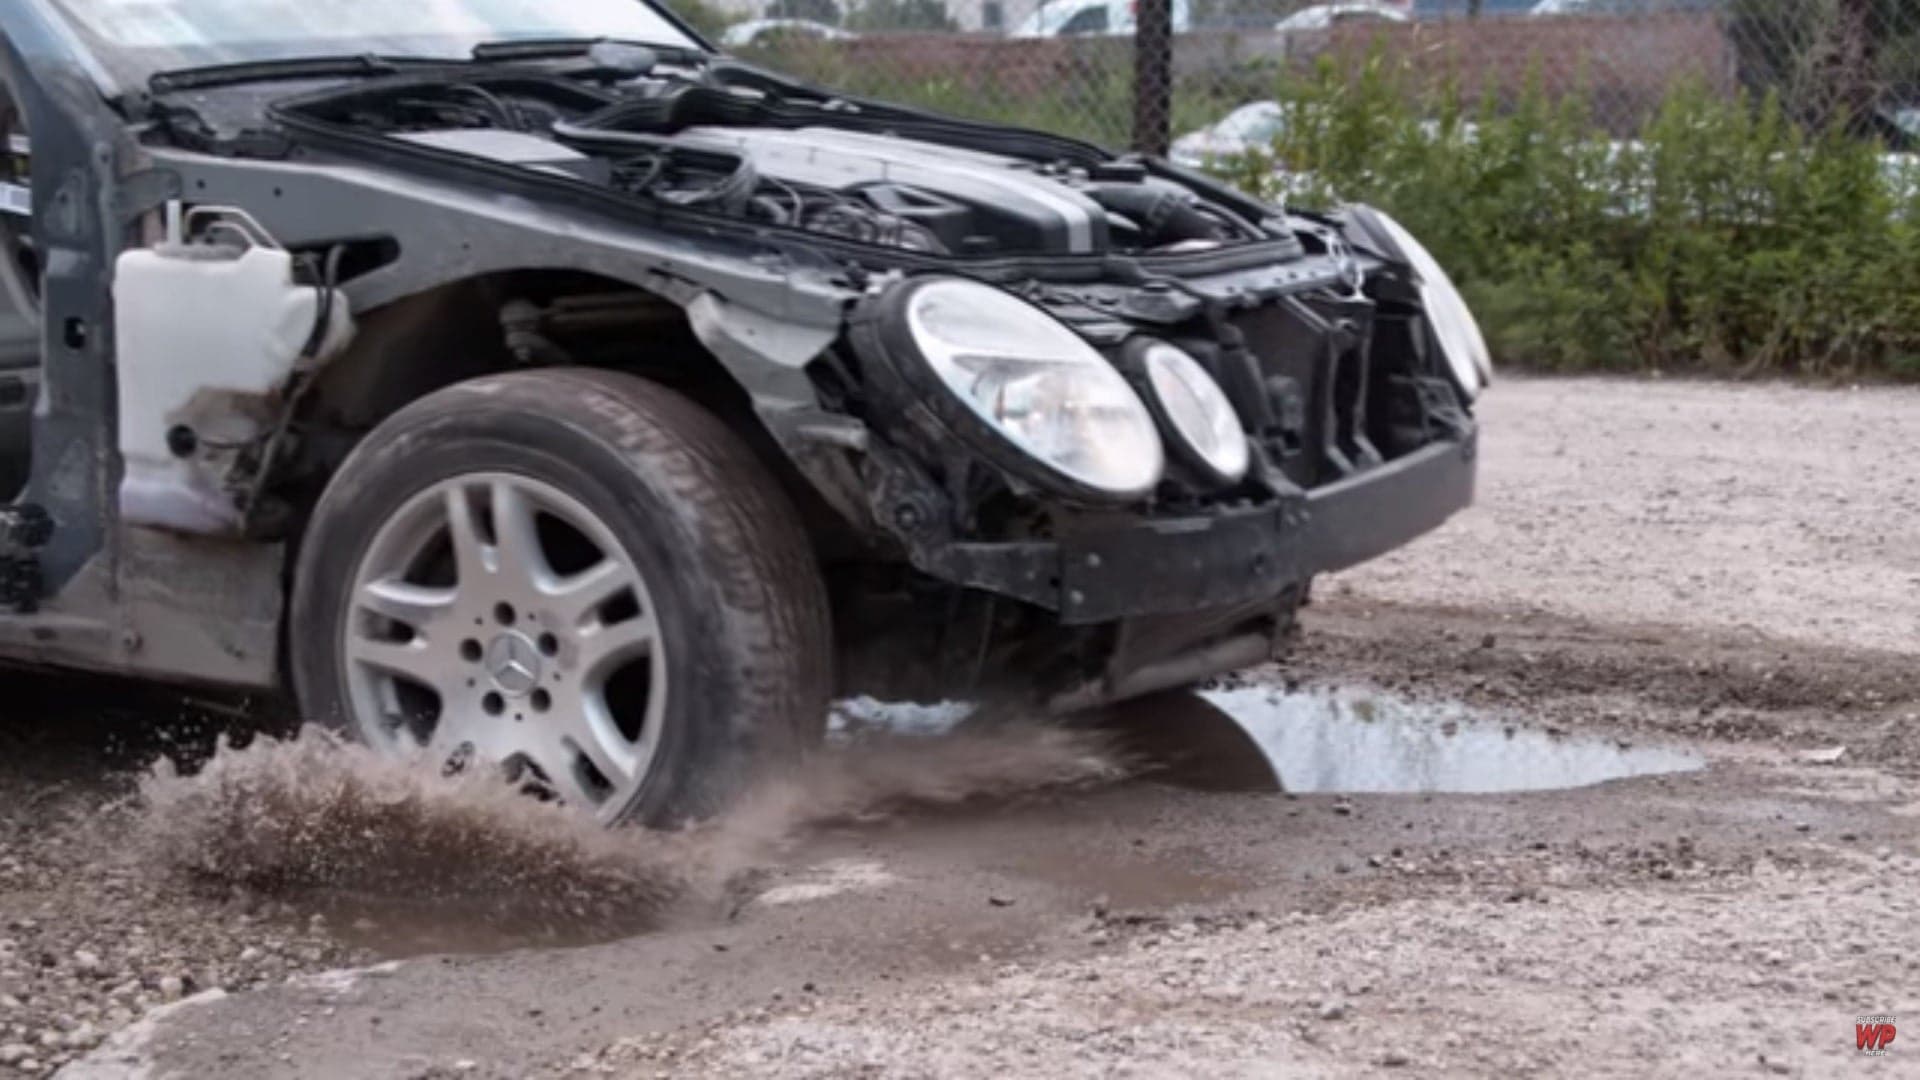 Watch a Stripped Mercedes E-Class Get Smashed up Over Bad Potholes on Purpose